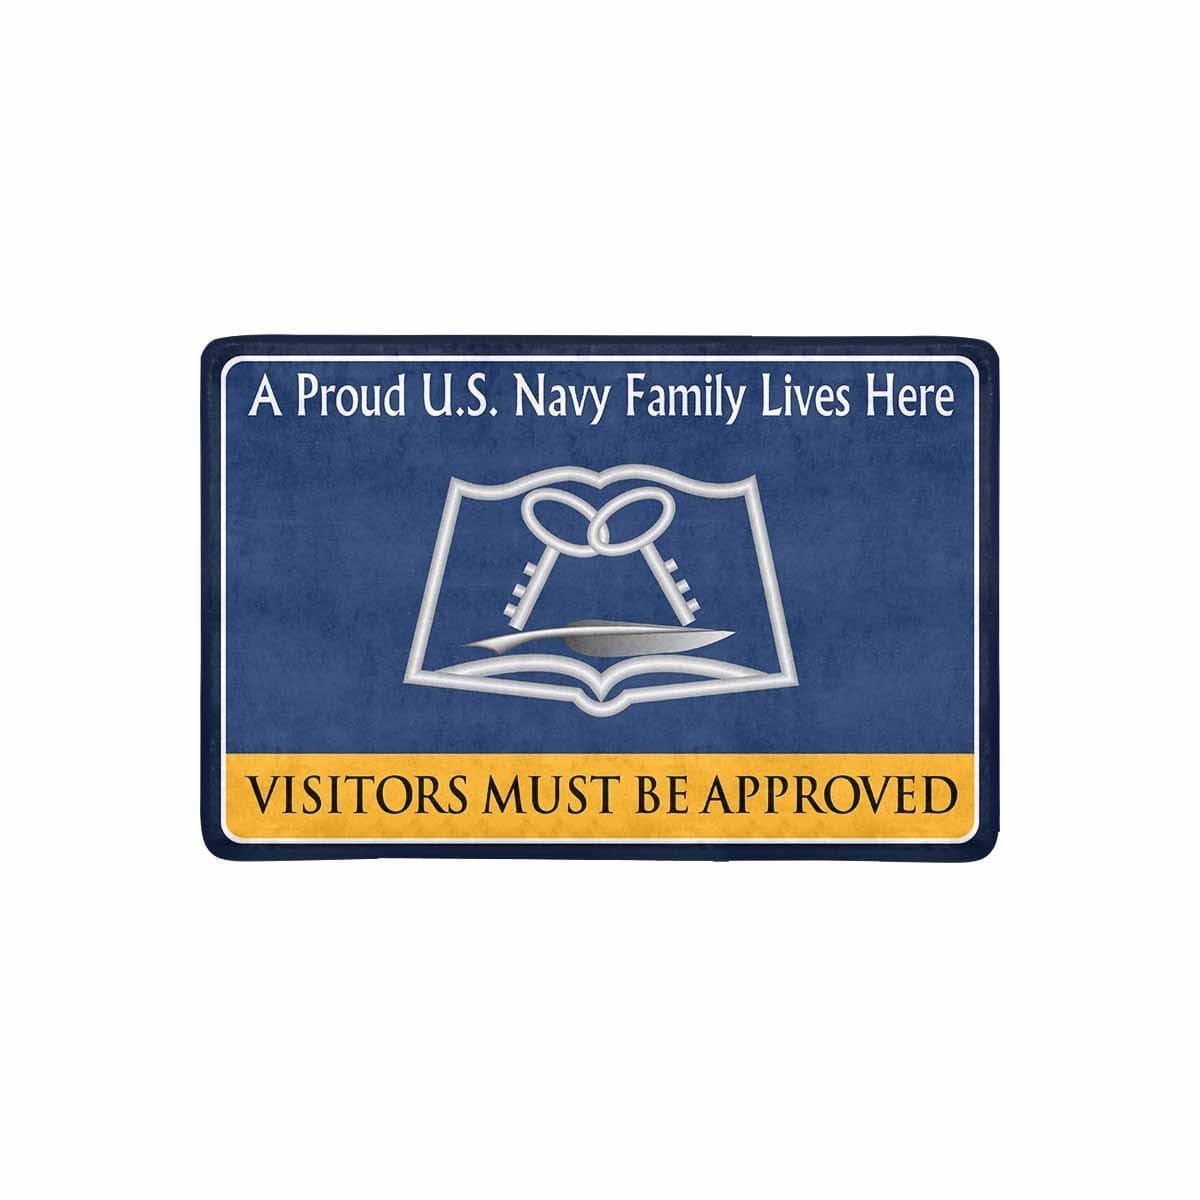 Navy Mess Management Specialist Navy MS Family Doormat - Visitors must be approved (23,6 inches x 15,7 inches)-Doormat-Navy-Rate-Veterans Nation